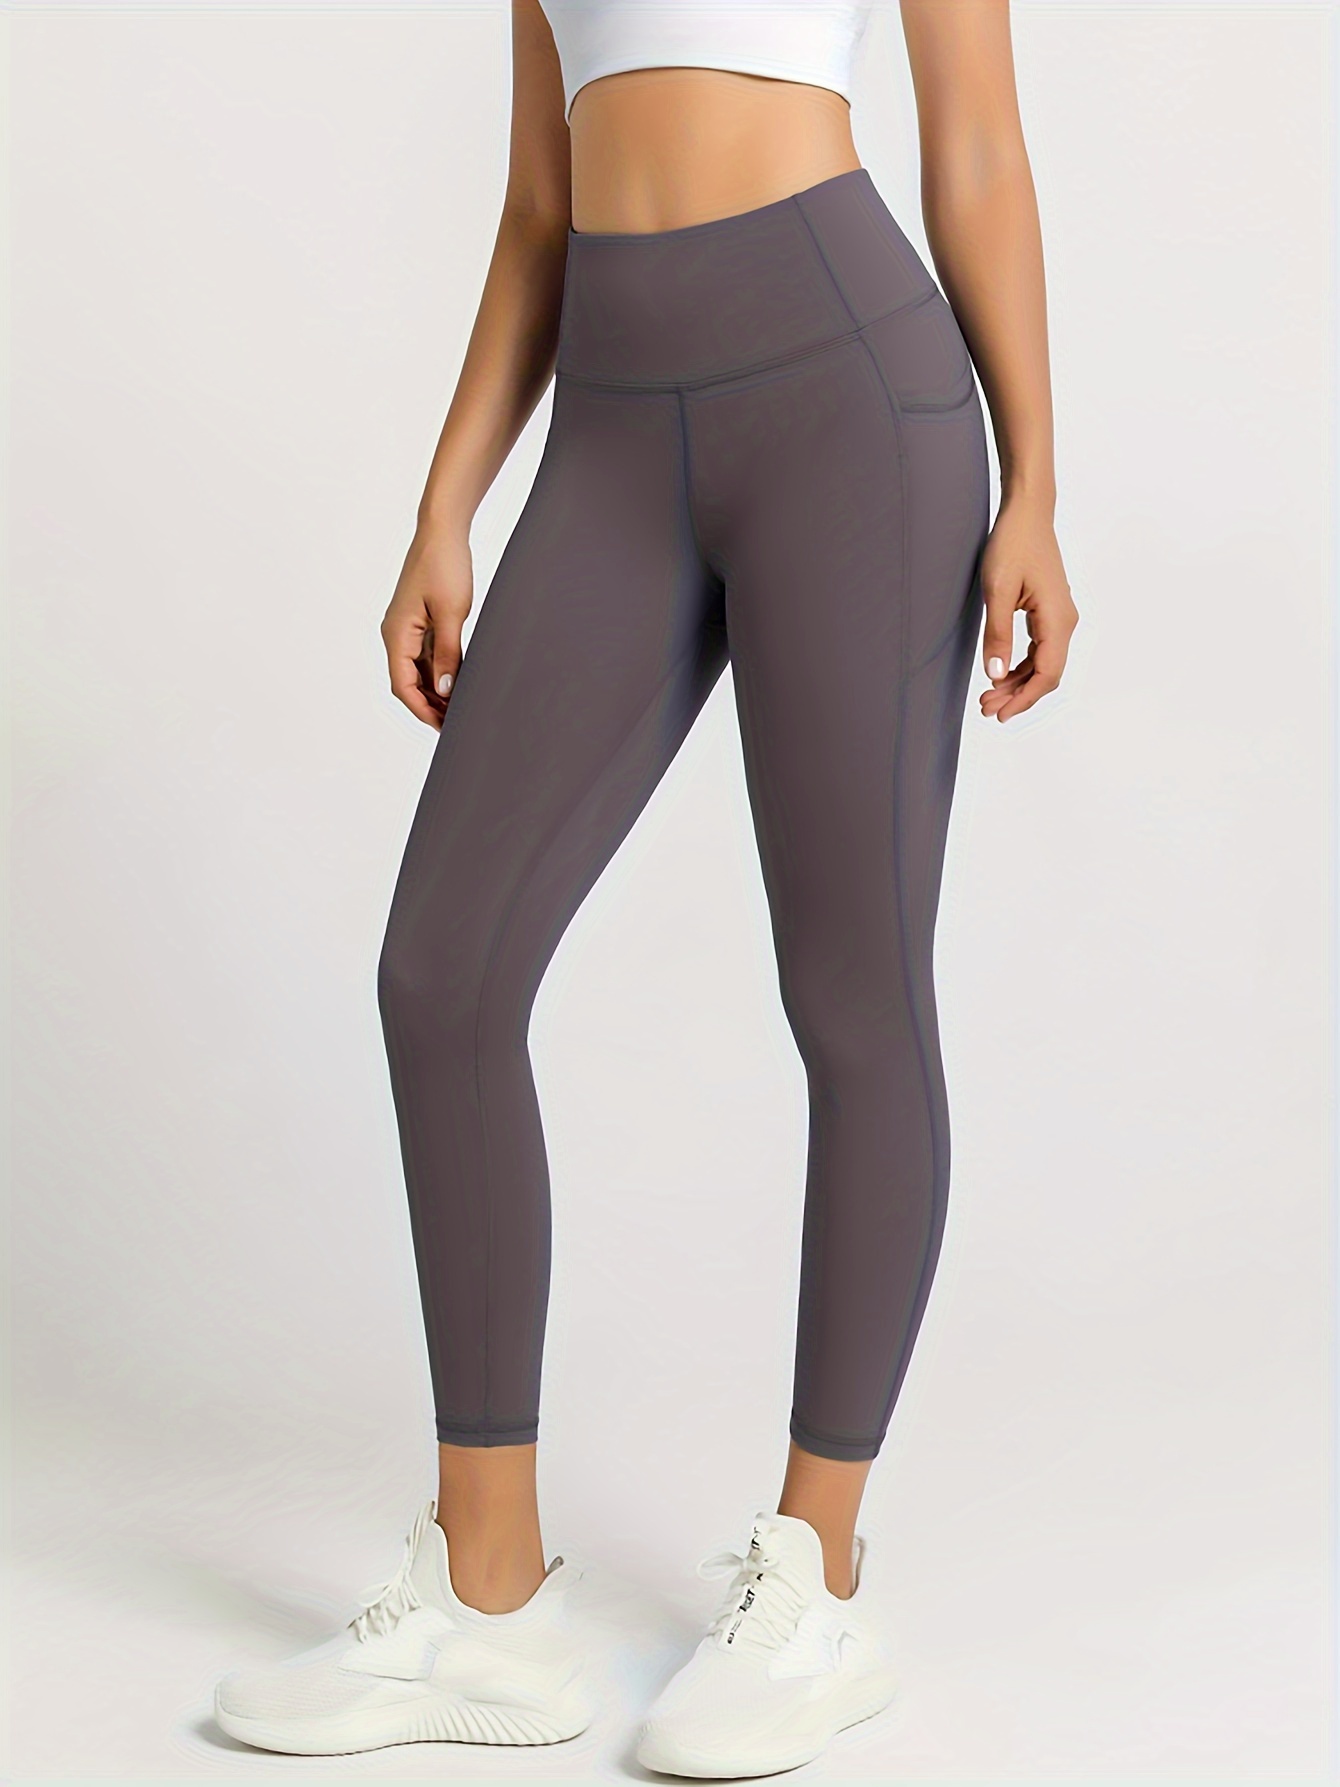 High Waist Fitness Leggings For Womens Breathable Quick Drying